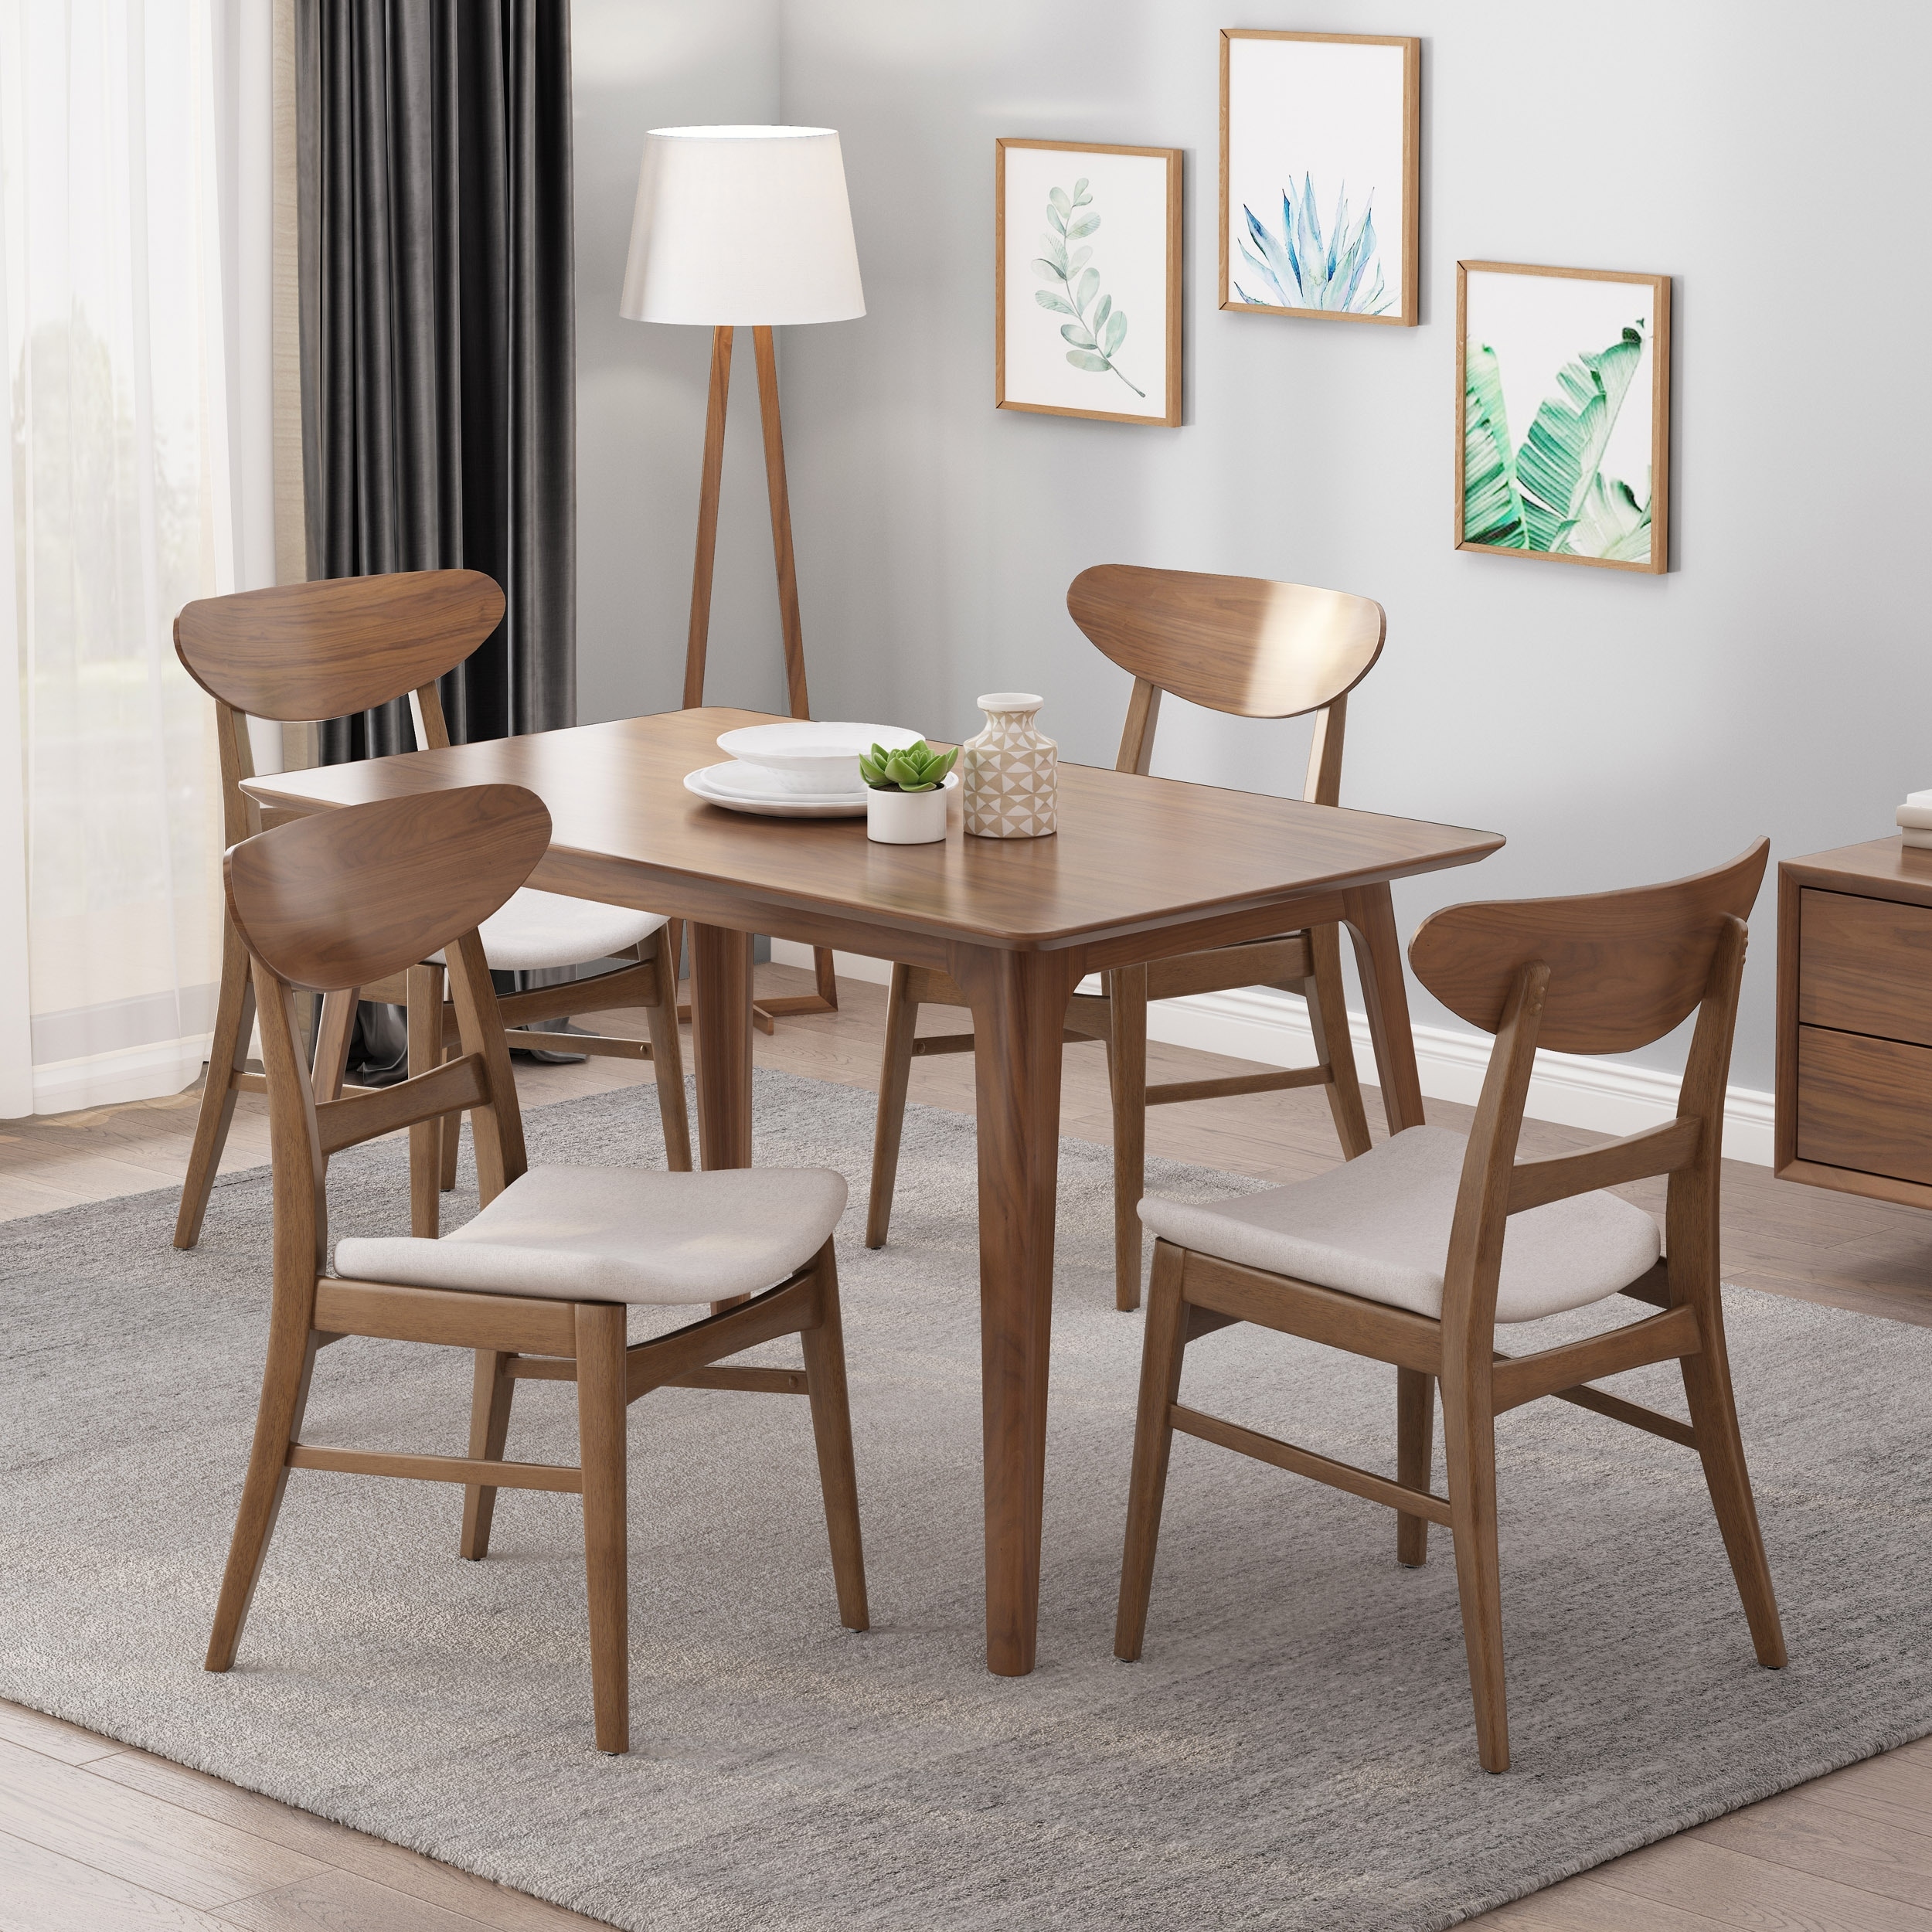 Idalia Mid Century Modern Dining Chairs Set Of 4 By Christopher Knight Home On Sale Overstock 31294597